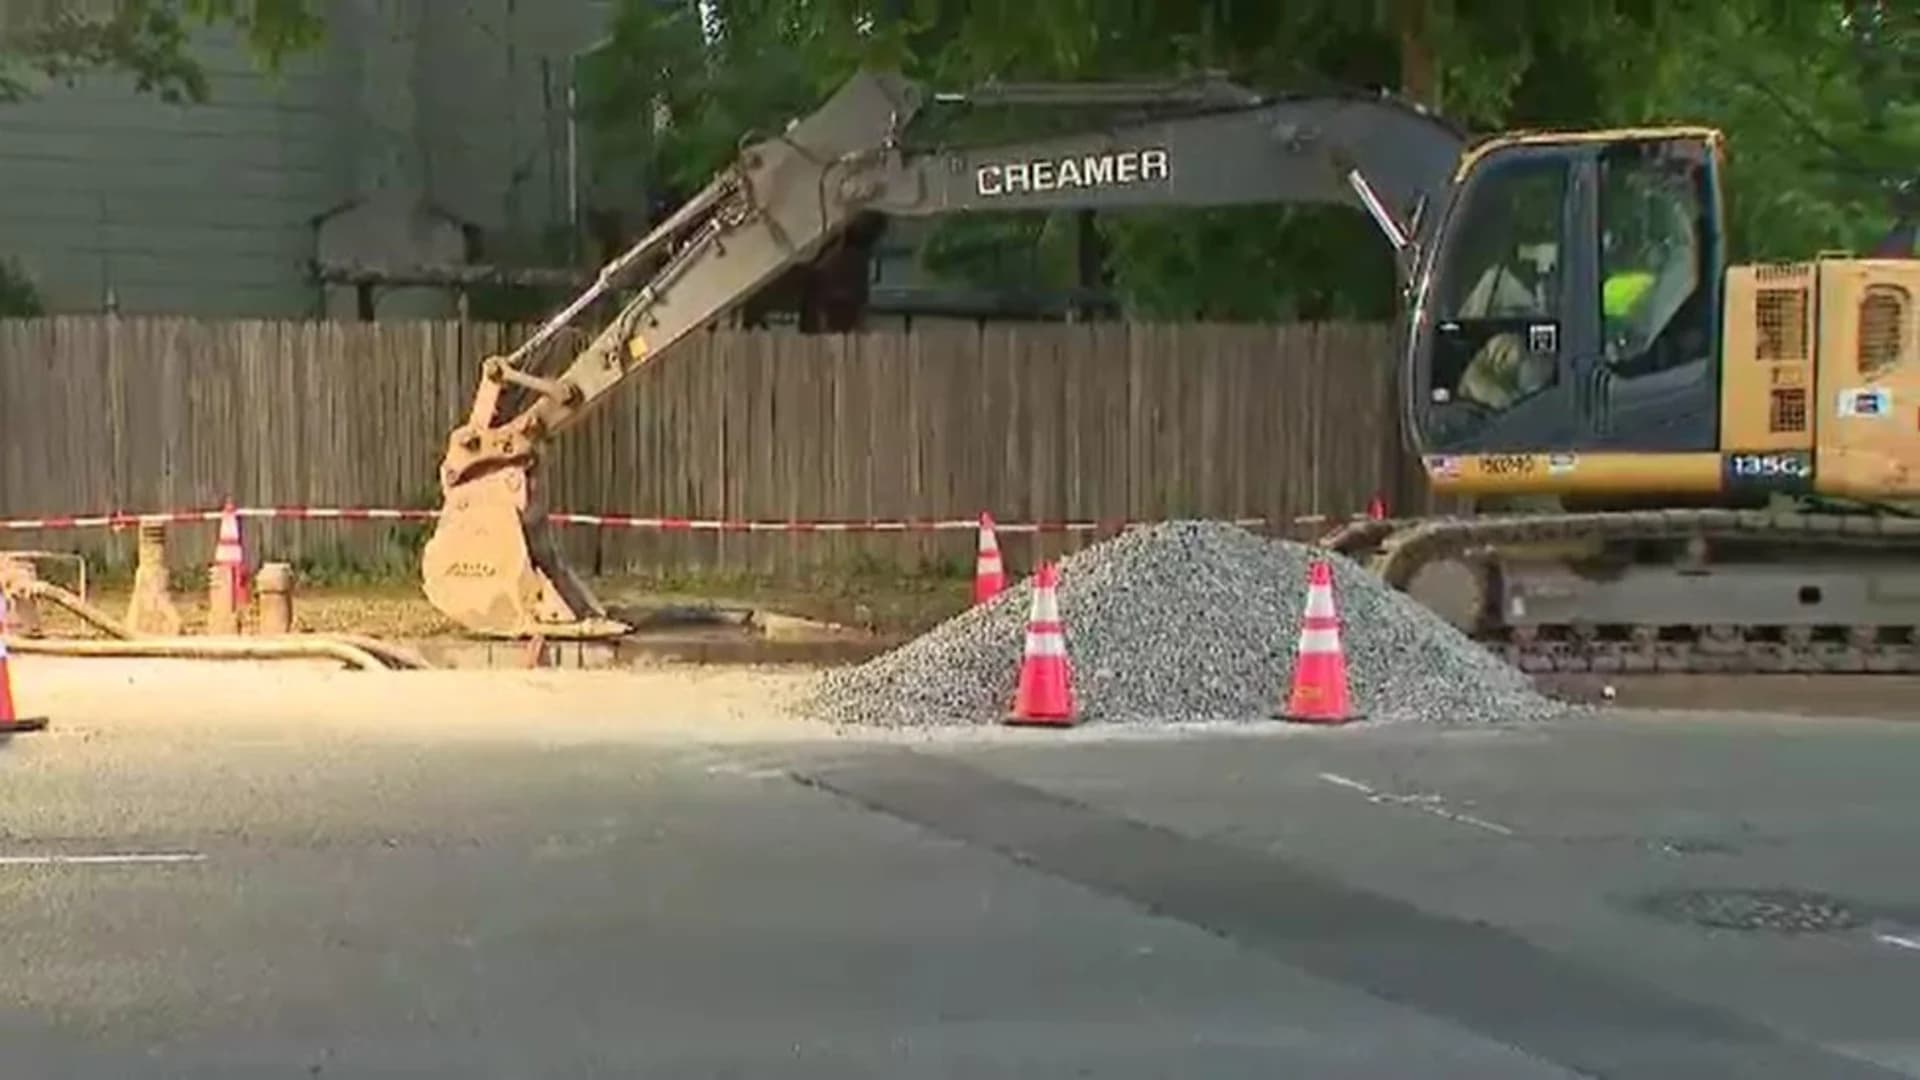 Police: Service restored following water main break in Middlesex Borough